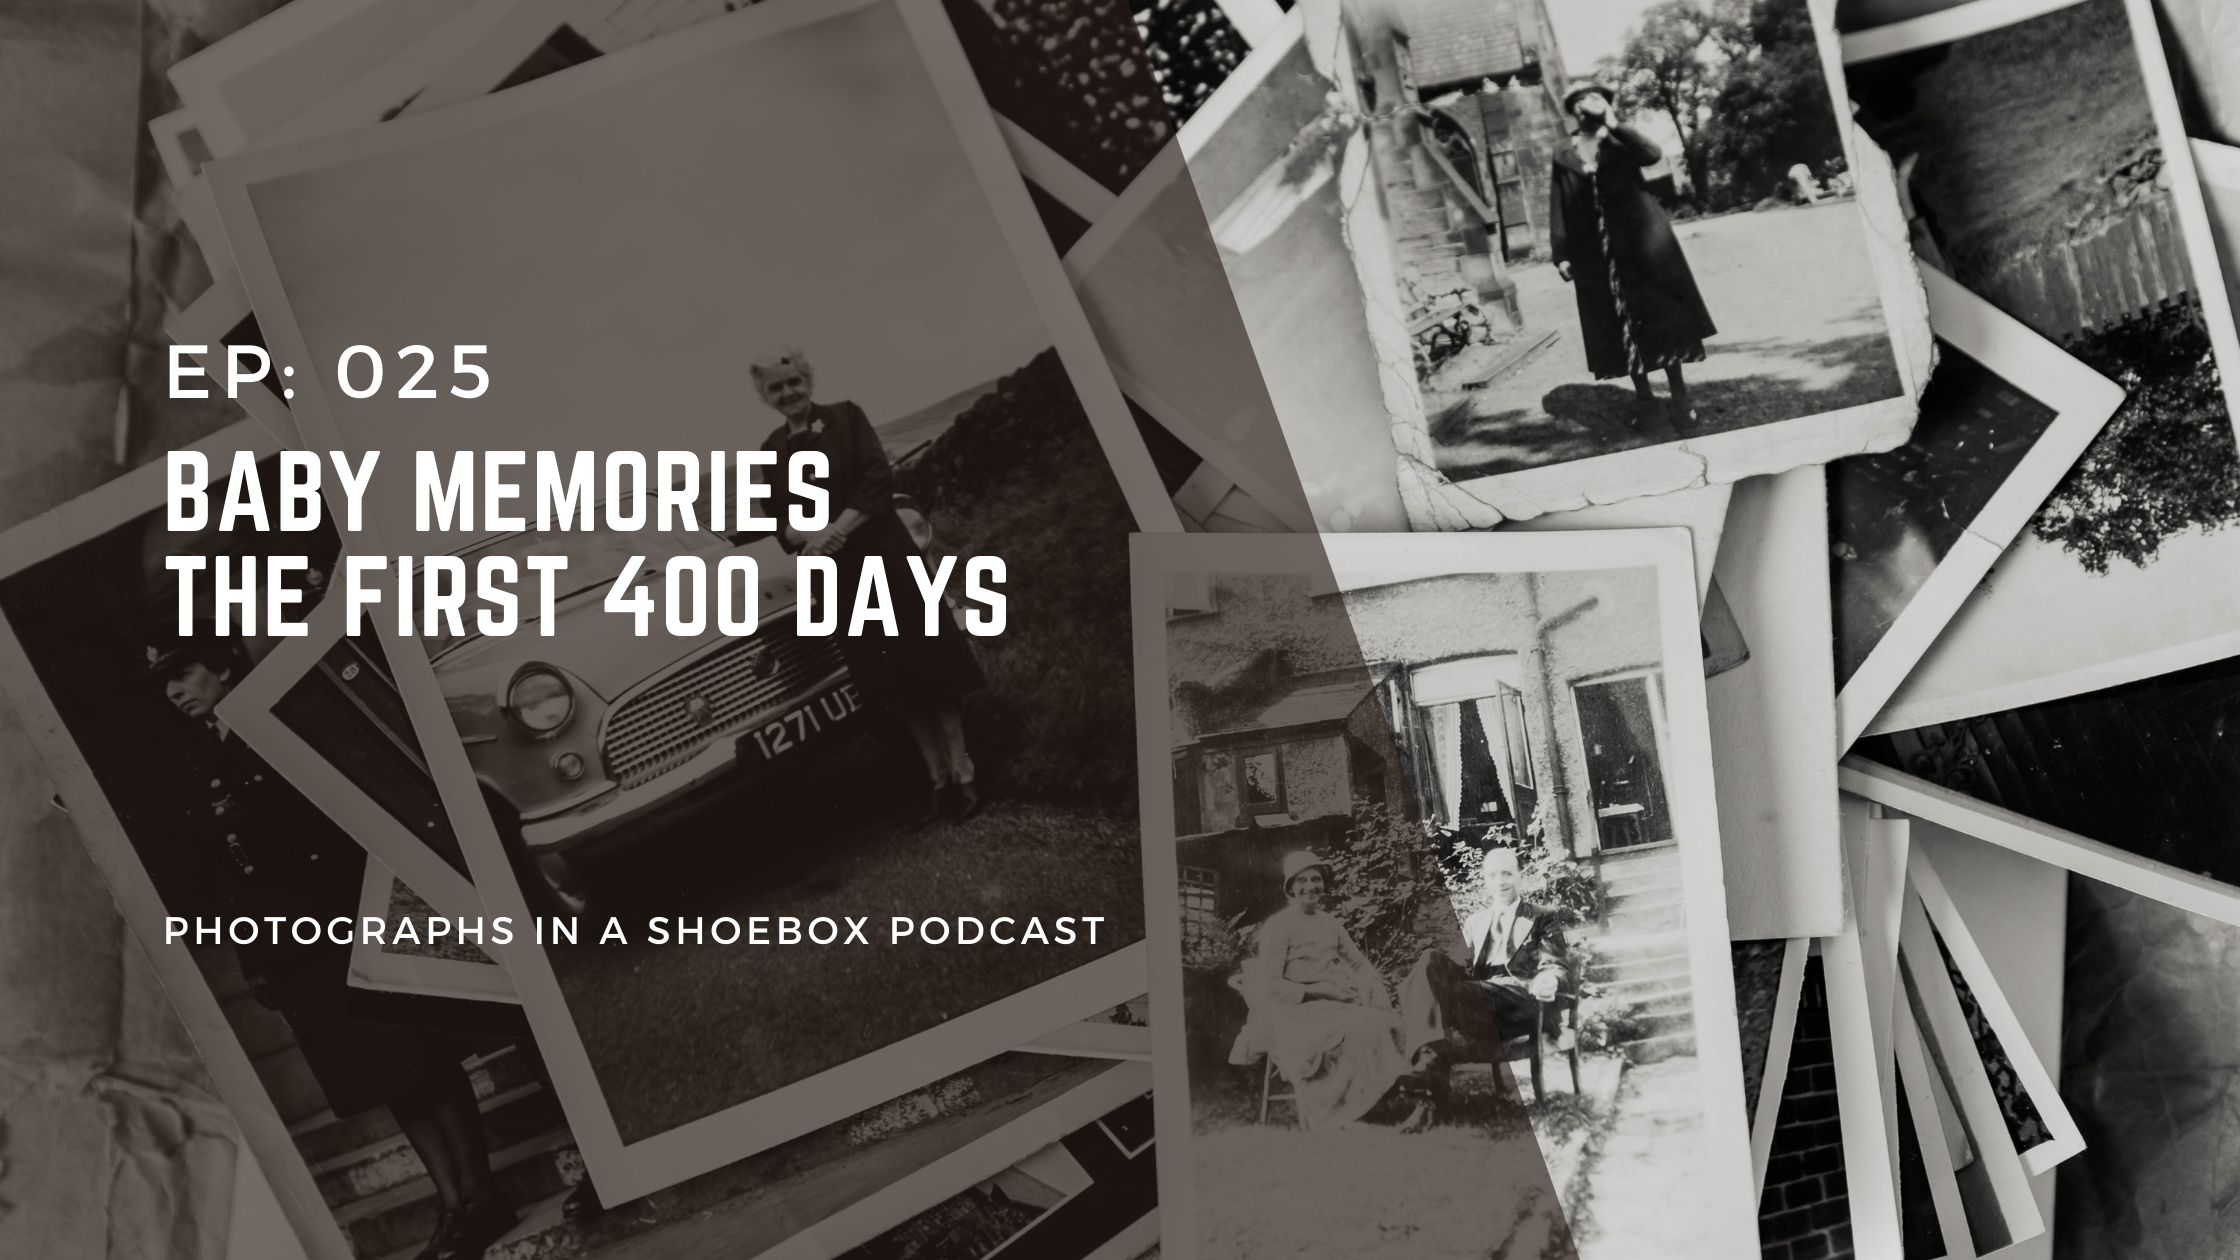 artwork for photographs in a shoebox podcast episode - baby memories the first 400 days